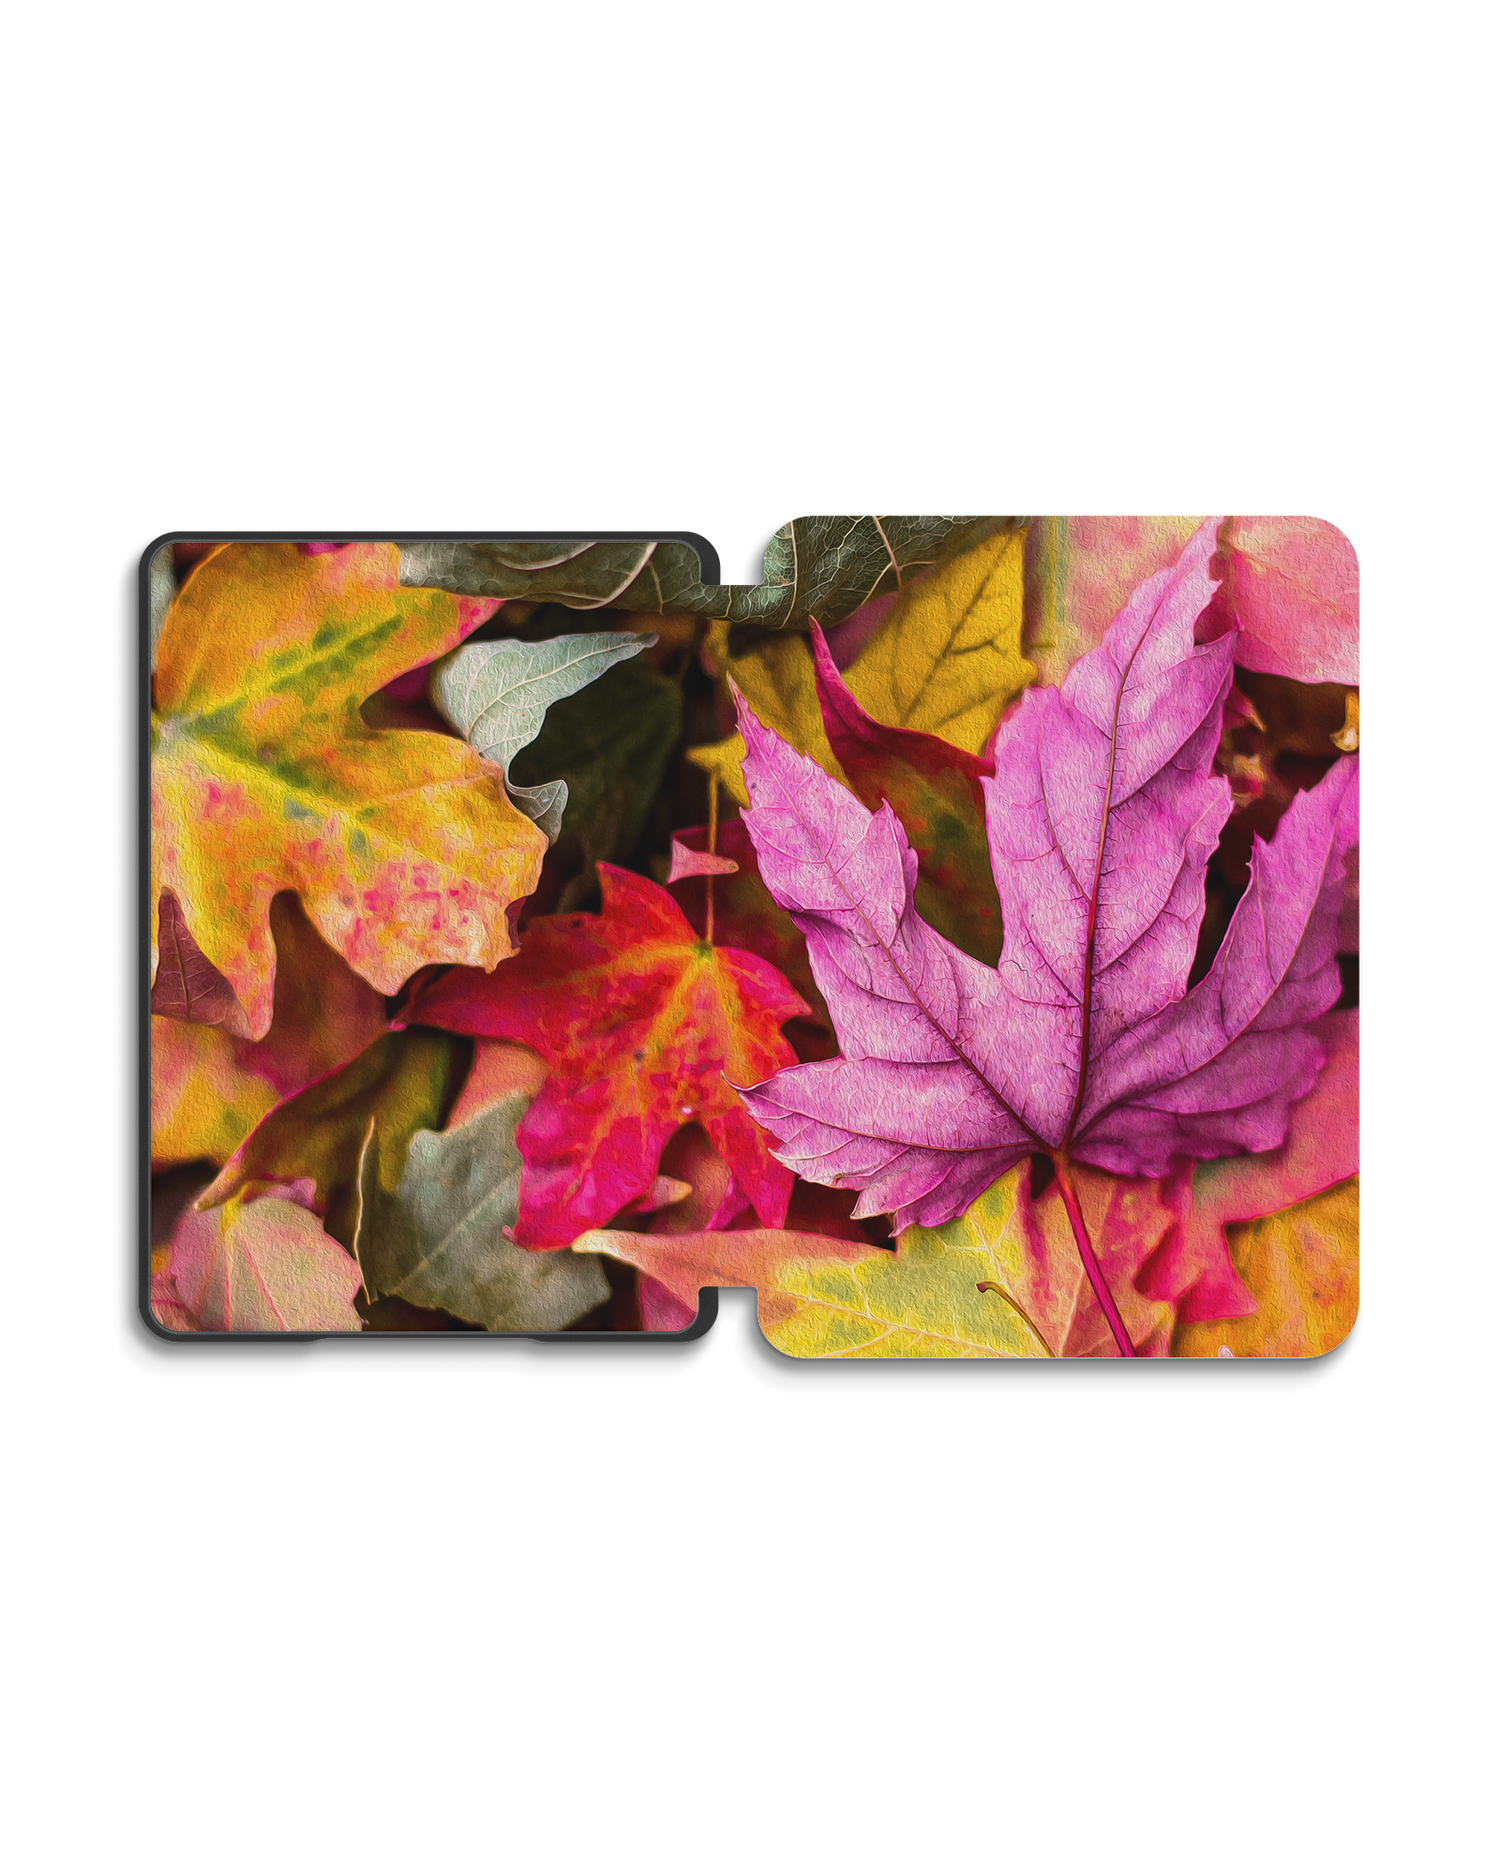 Autumn Leaves eReader Smart Case for Amazon New Kindle (2019): Opened exterior view